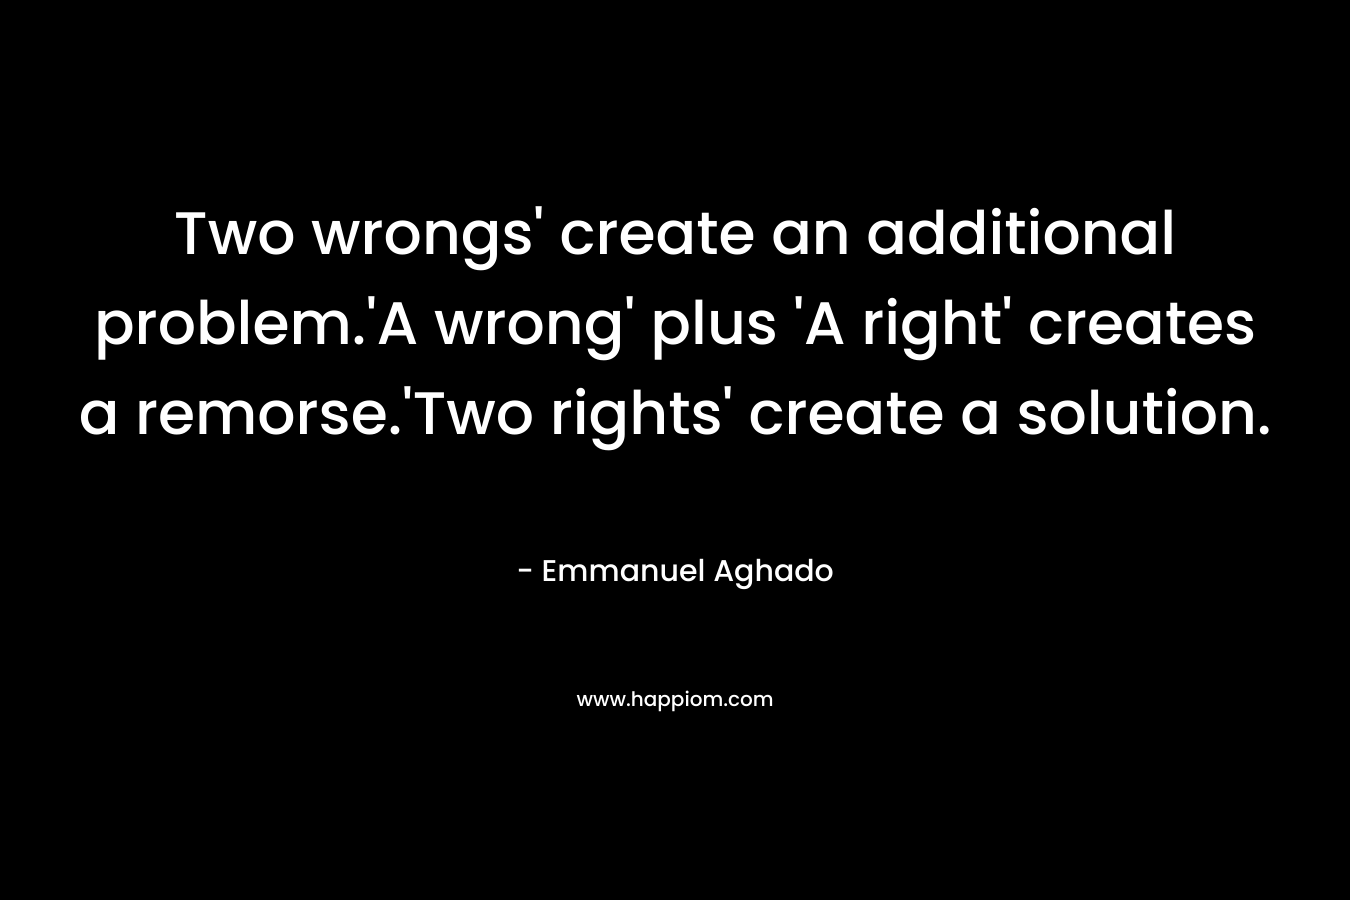 Two wrongs' create an additional problem.'A wrong' plus 'A right' creates a remorse.'Two rights' create a solution.